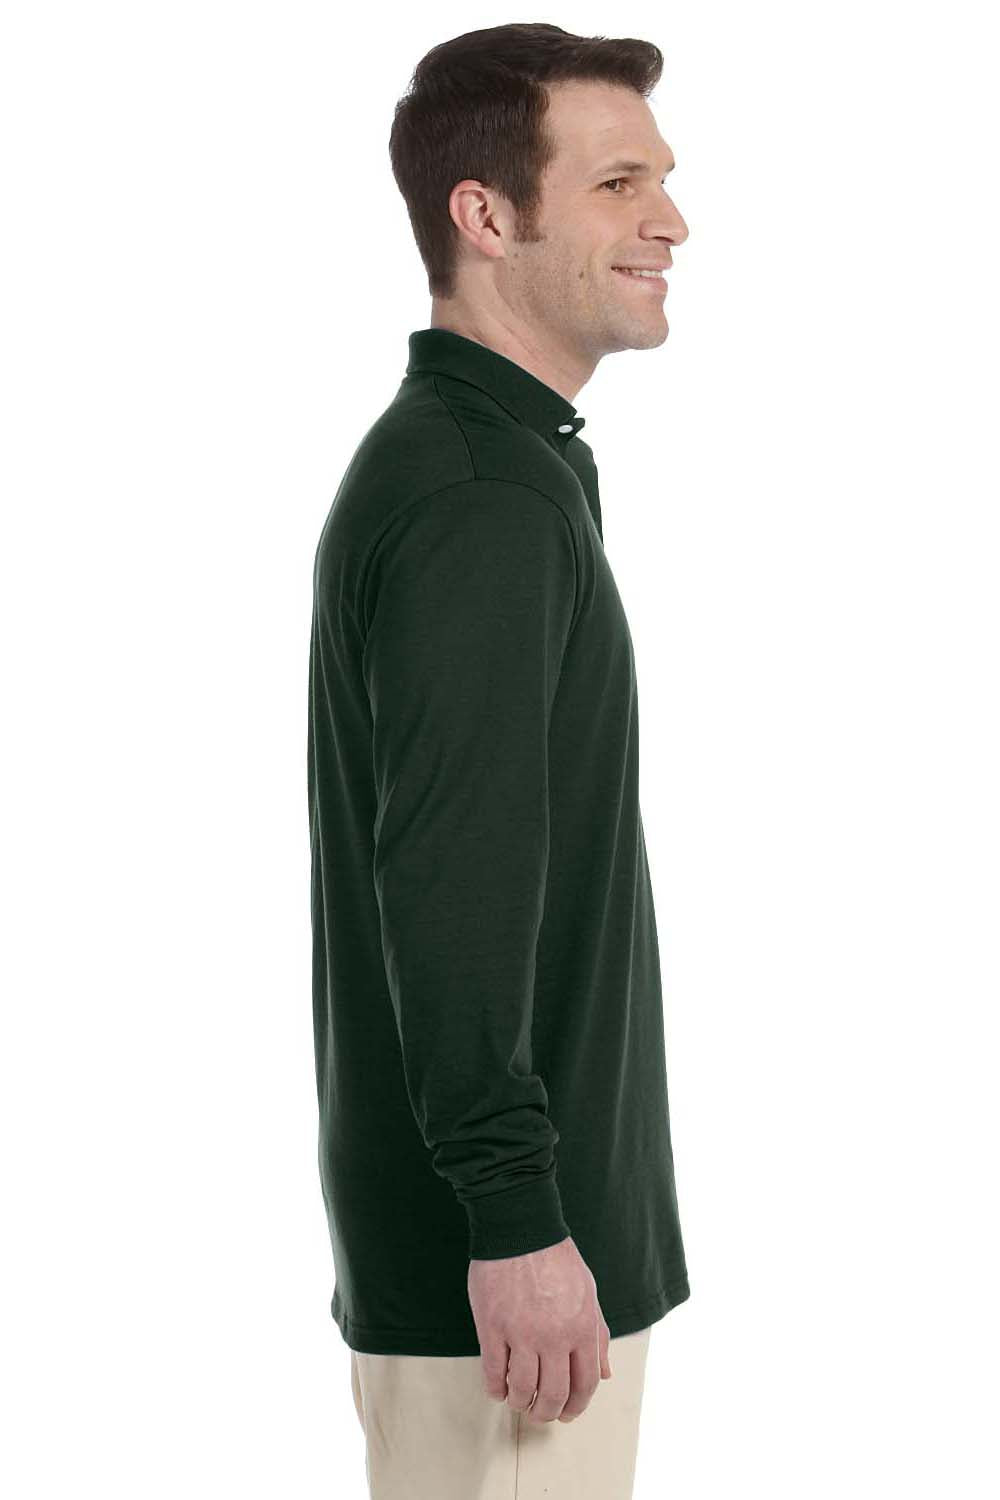 Jerzees 437ML Mens SpotShield Stain Resistant Long Sleeve Polo Shirt Forest Green Side